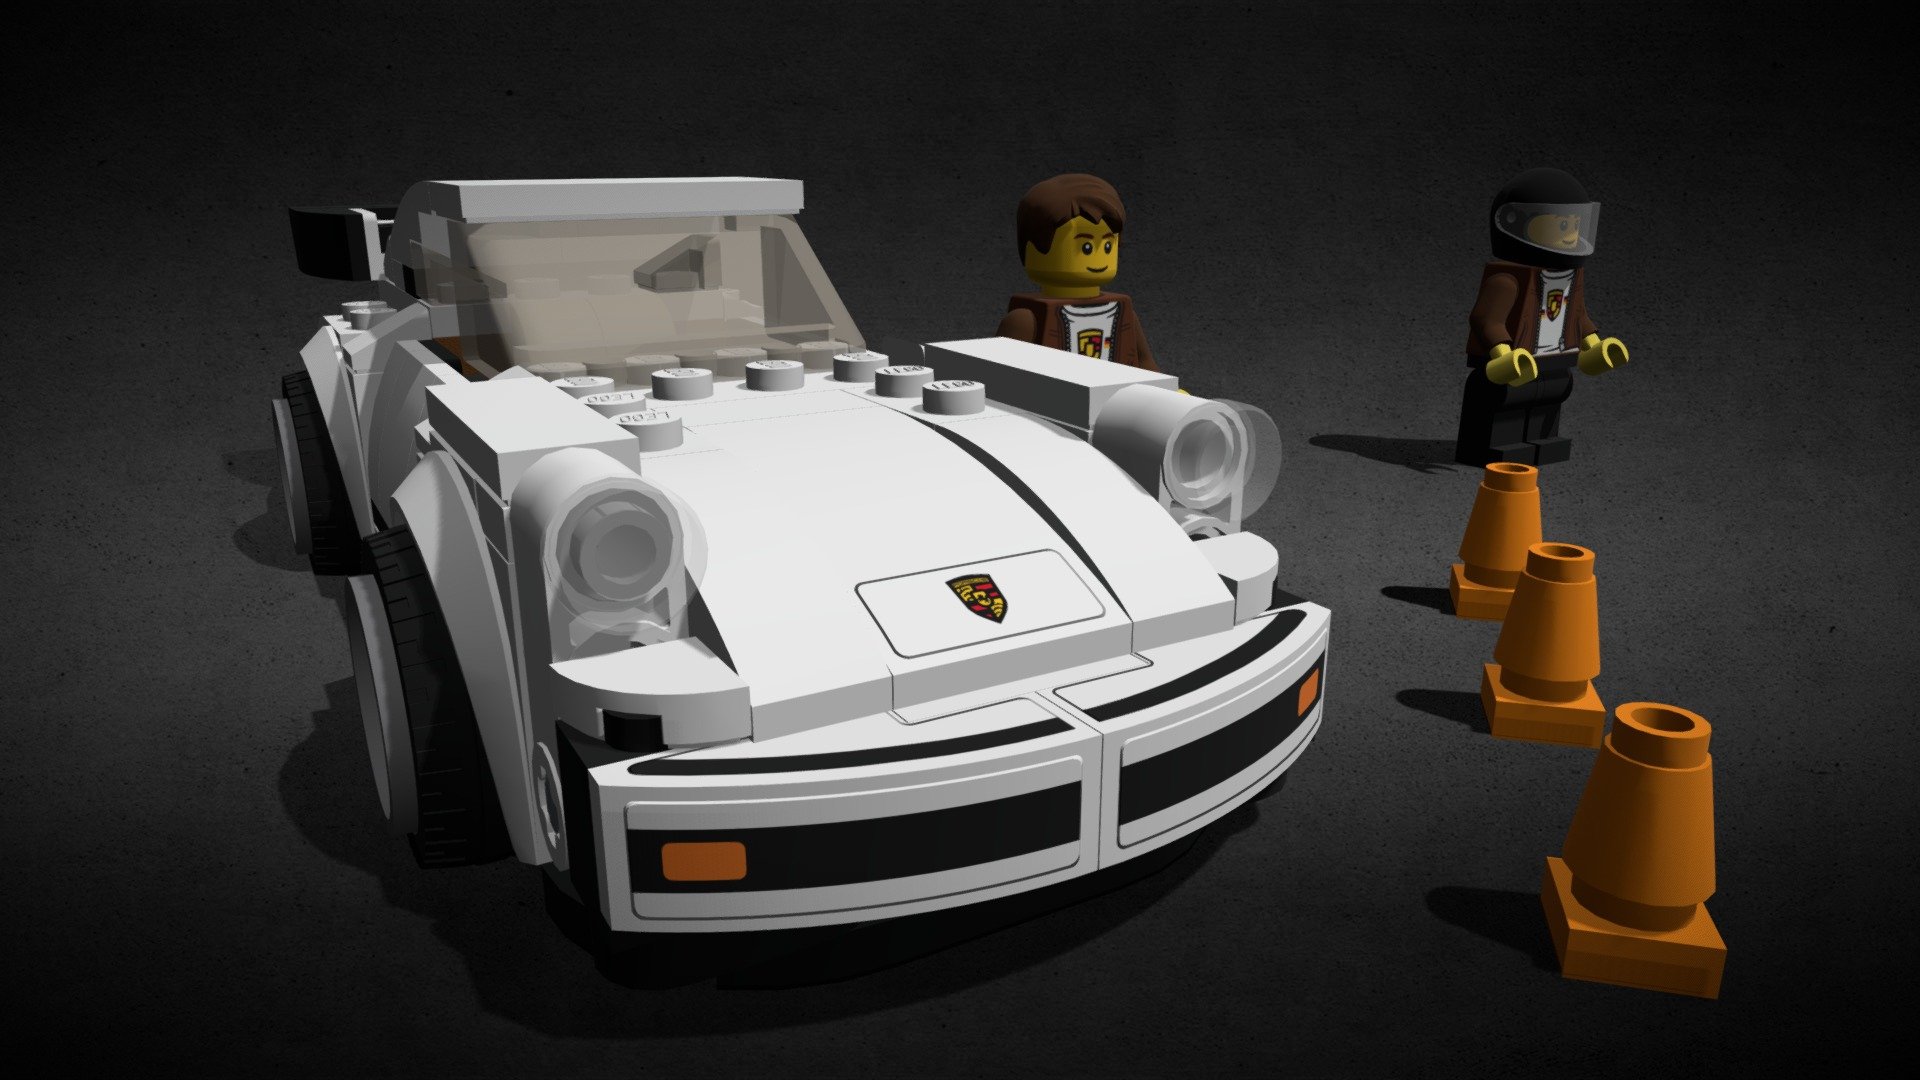 Complete car and minifigure from LEGO 75895 kit. All stickers and textures. It is not a scan, but a complete kit, contains all the cubes. Includes 1974 PORSCHE 911 TURBO 3.0 from game Forza Horizon 4, 2x minifigure and 3x traffic cone 3d model